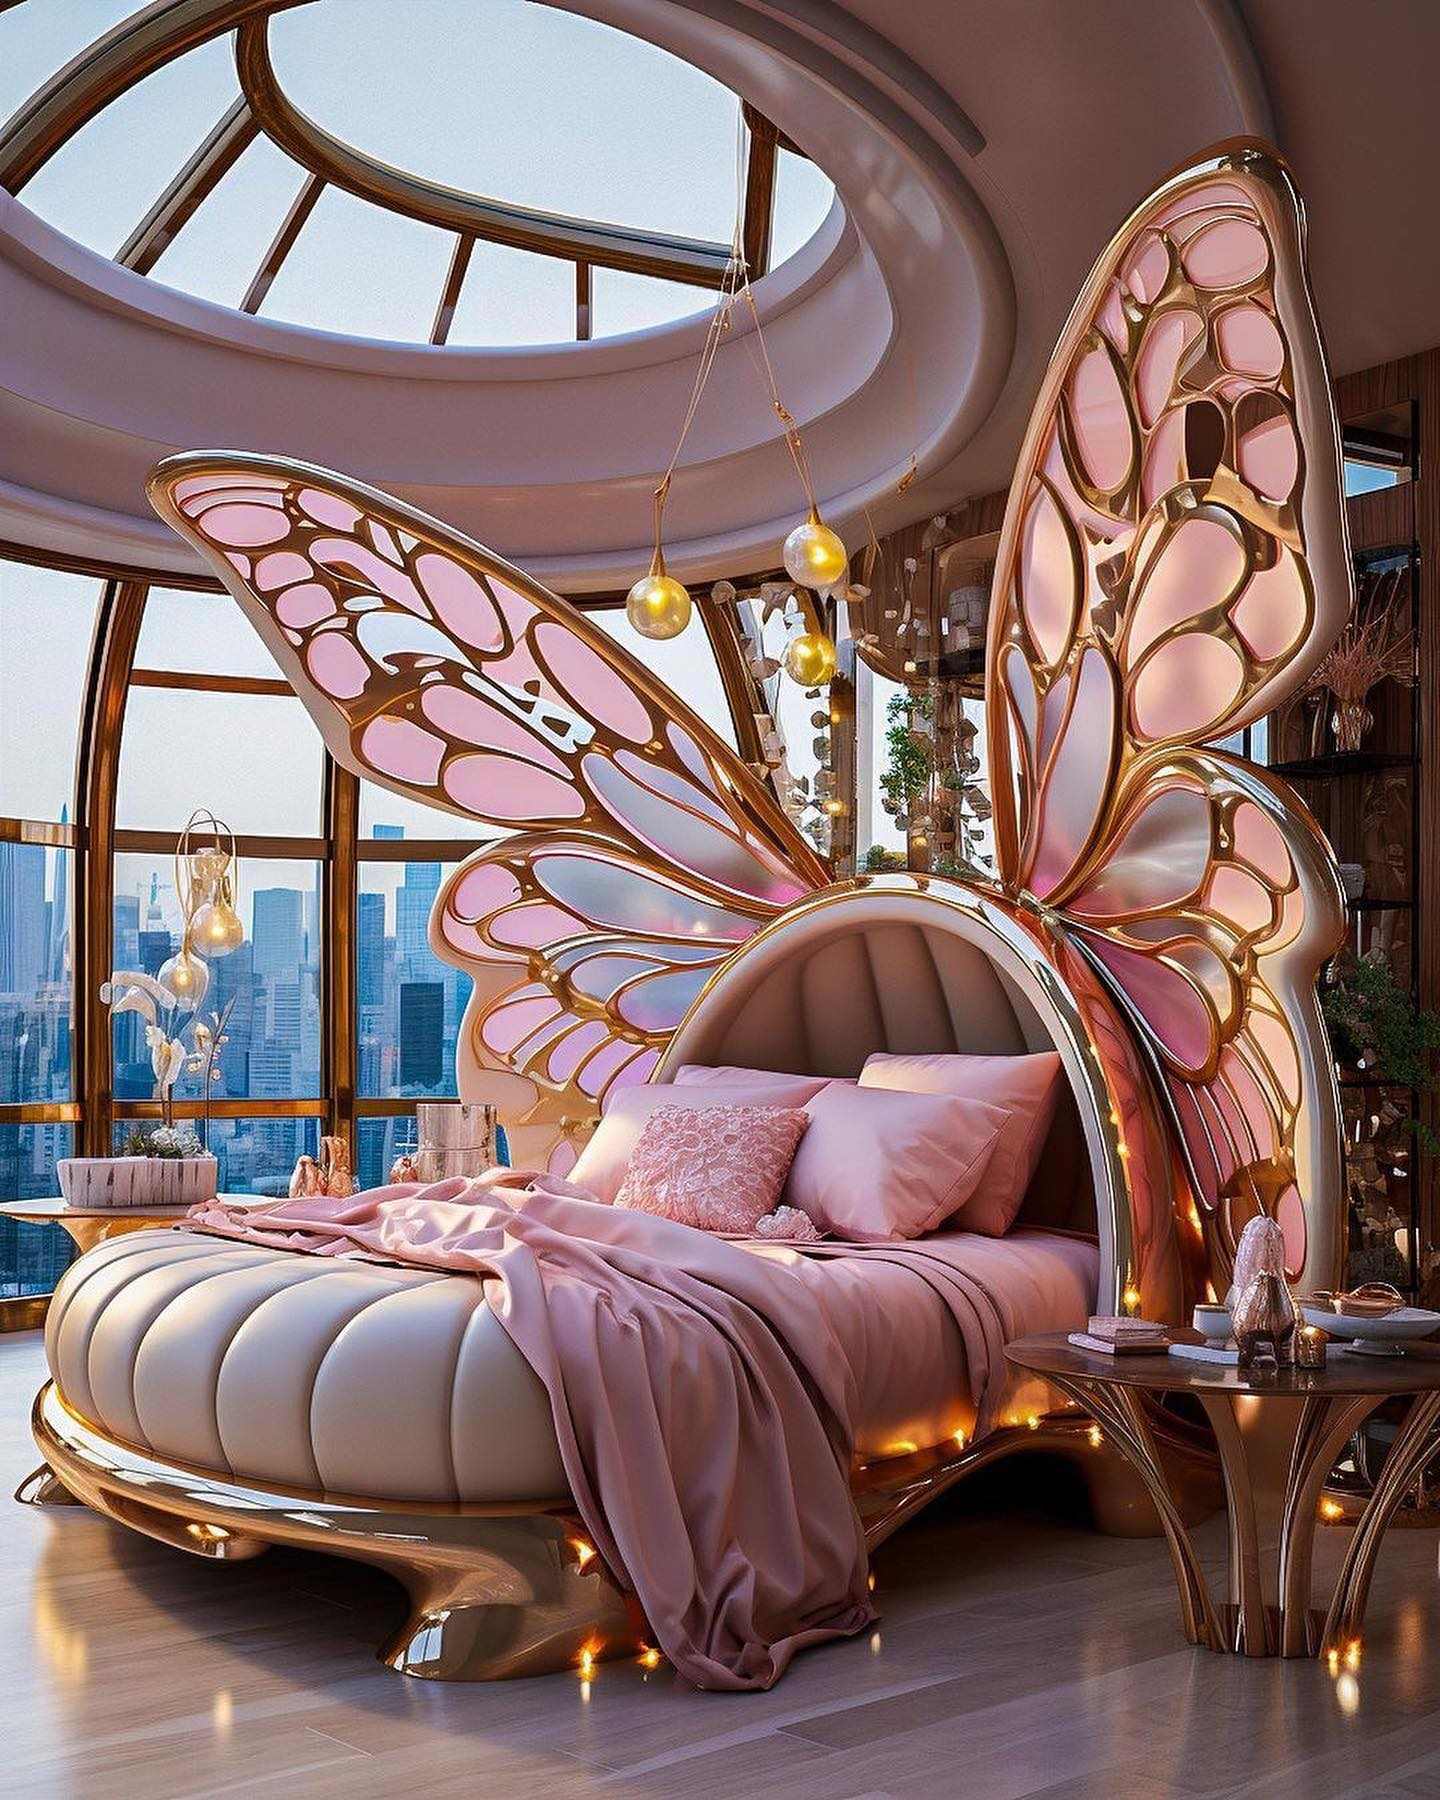 Butterfly Bed – Creating a Cozy Atmosphere for Your Bedroom